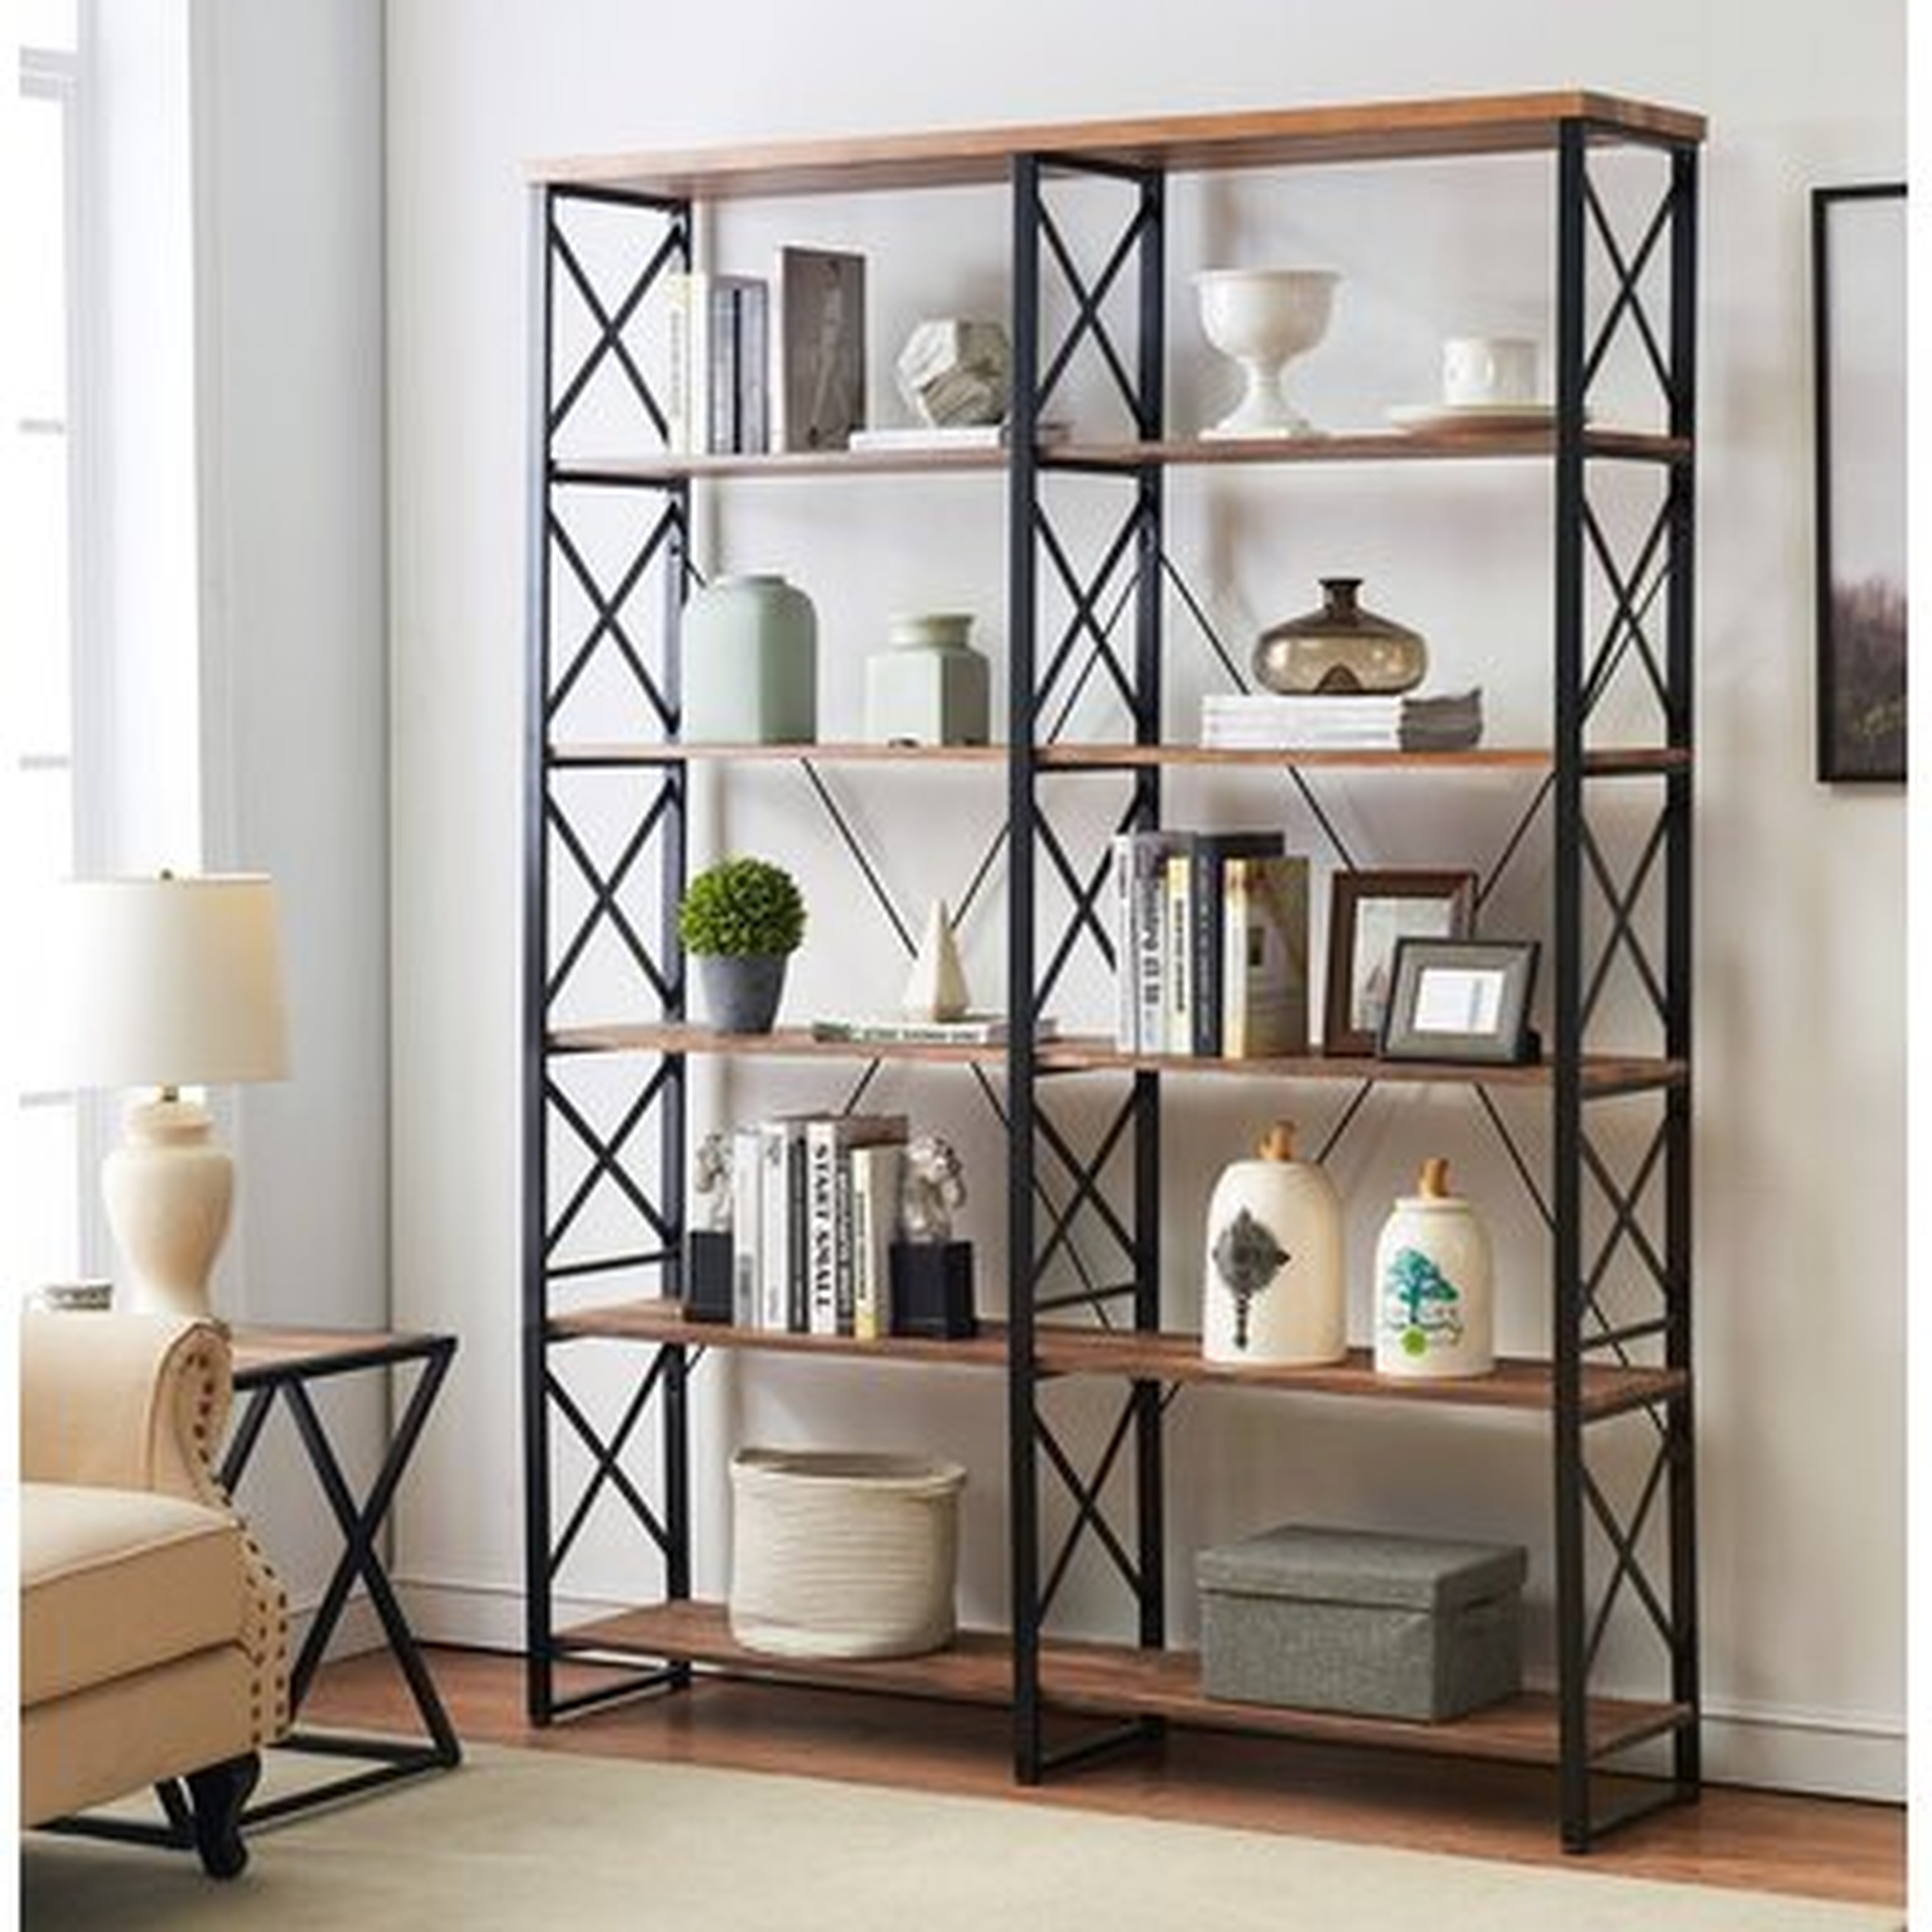 Bookshelf, Double Wide 6-tier Open Bookcase Vintage Industrial Large Shelves, Wood And Metal Etagere Bookshelves, For Home Decor Display, Office Furniture - Wayfair